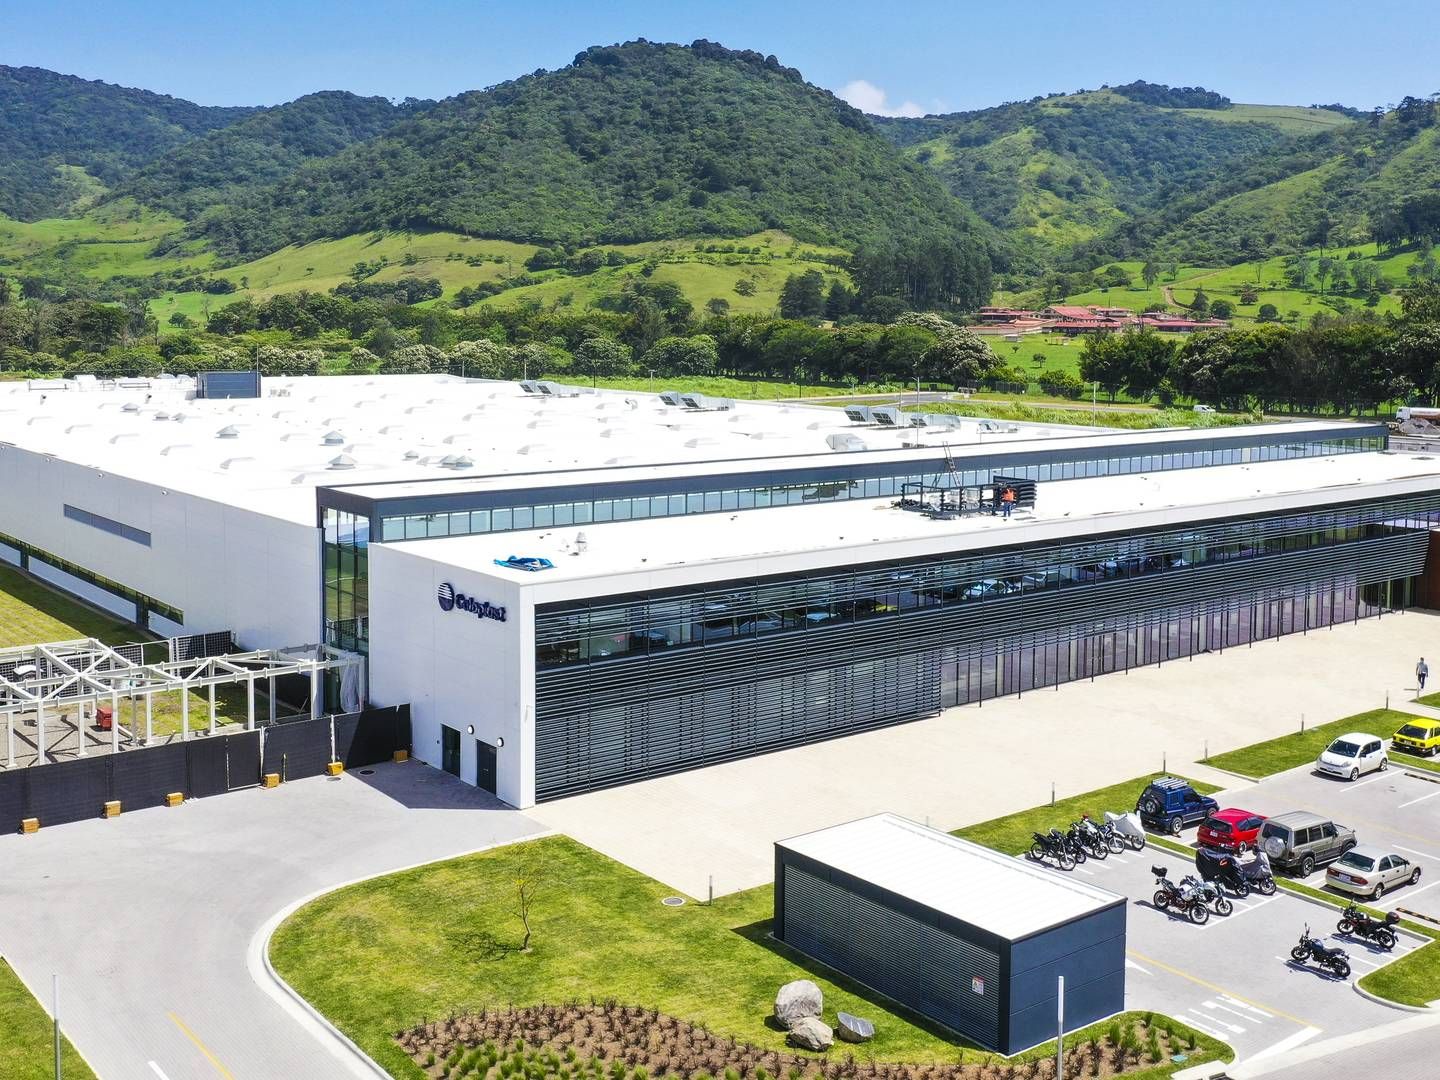 Coloplast has acquired a lush area of 100,000 square meters in Costa Rica, designated for two new large factories, around 20,000 square meters each. The Danish medtech company has injected around half a billion kroner (USD 76.2m) into the project so far, but tax payments in the country are nonetheless kept a secret | Photo: Coloplast/PR